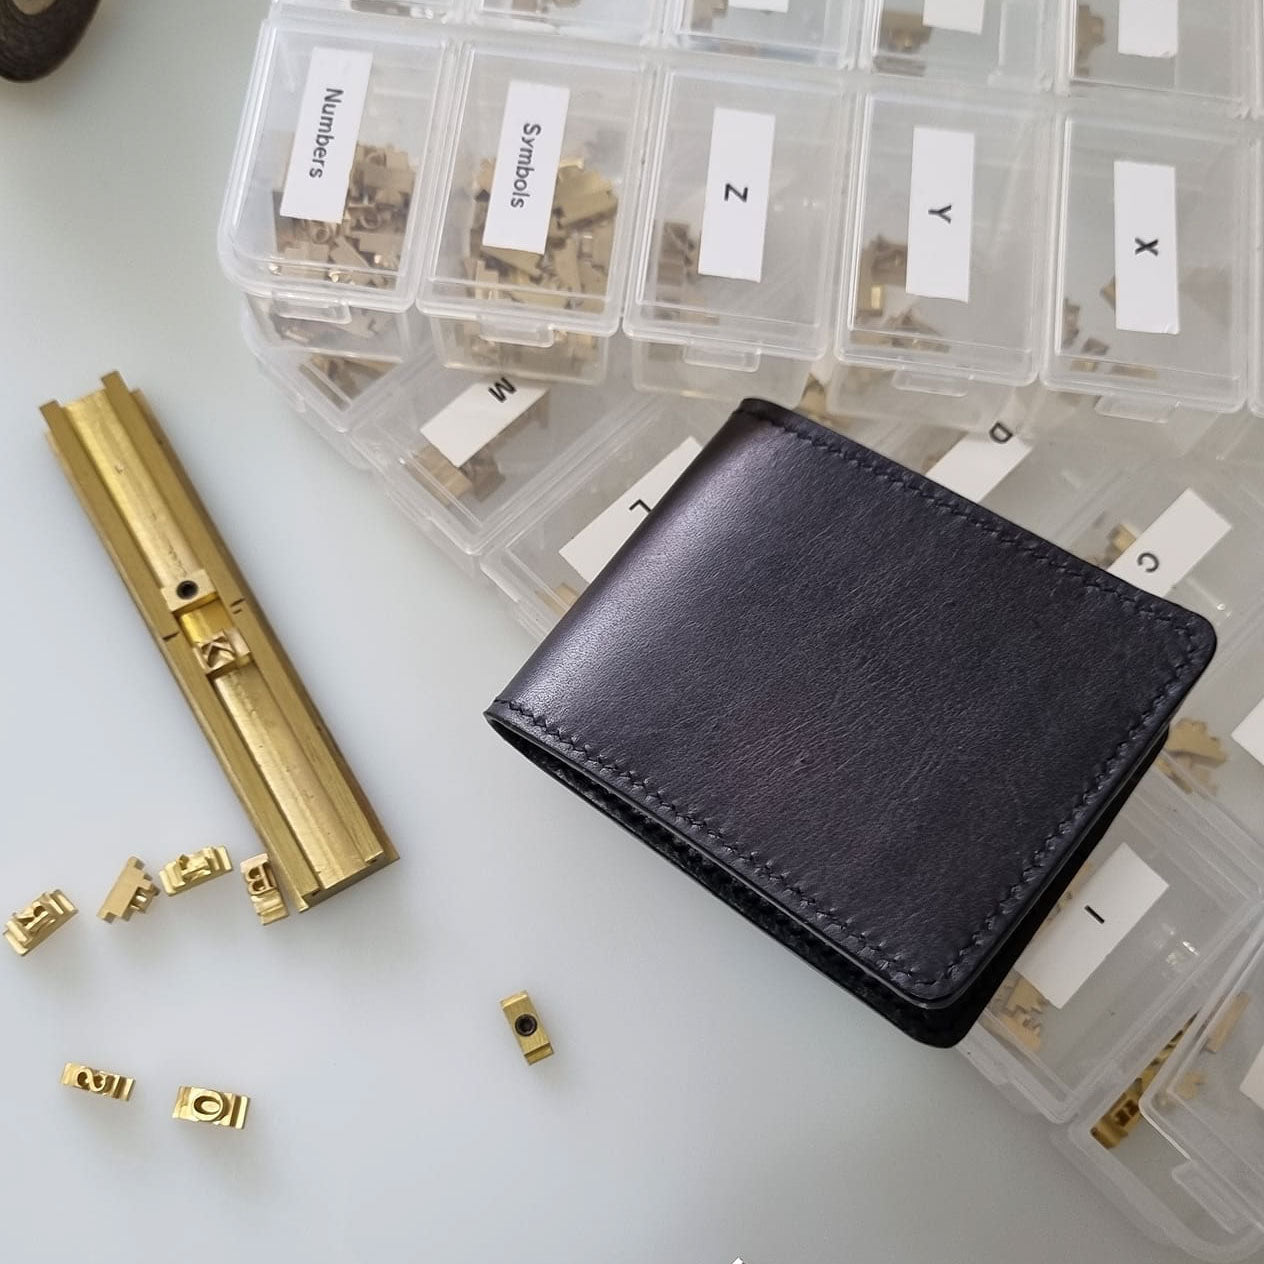 Wallet and personalisation stamping tools to add monogrammed name or initials to leathergoods.